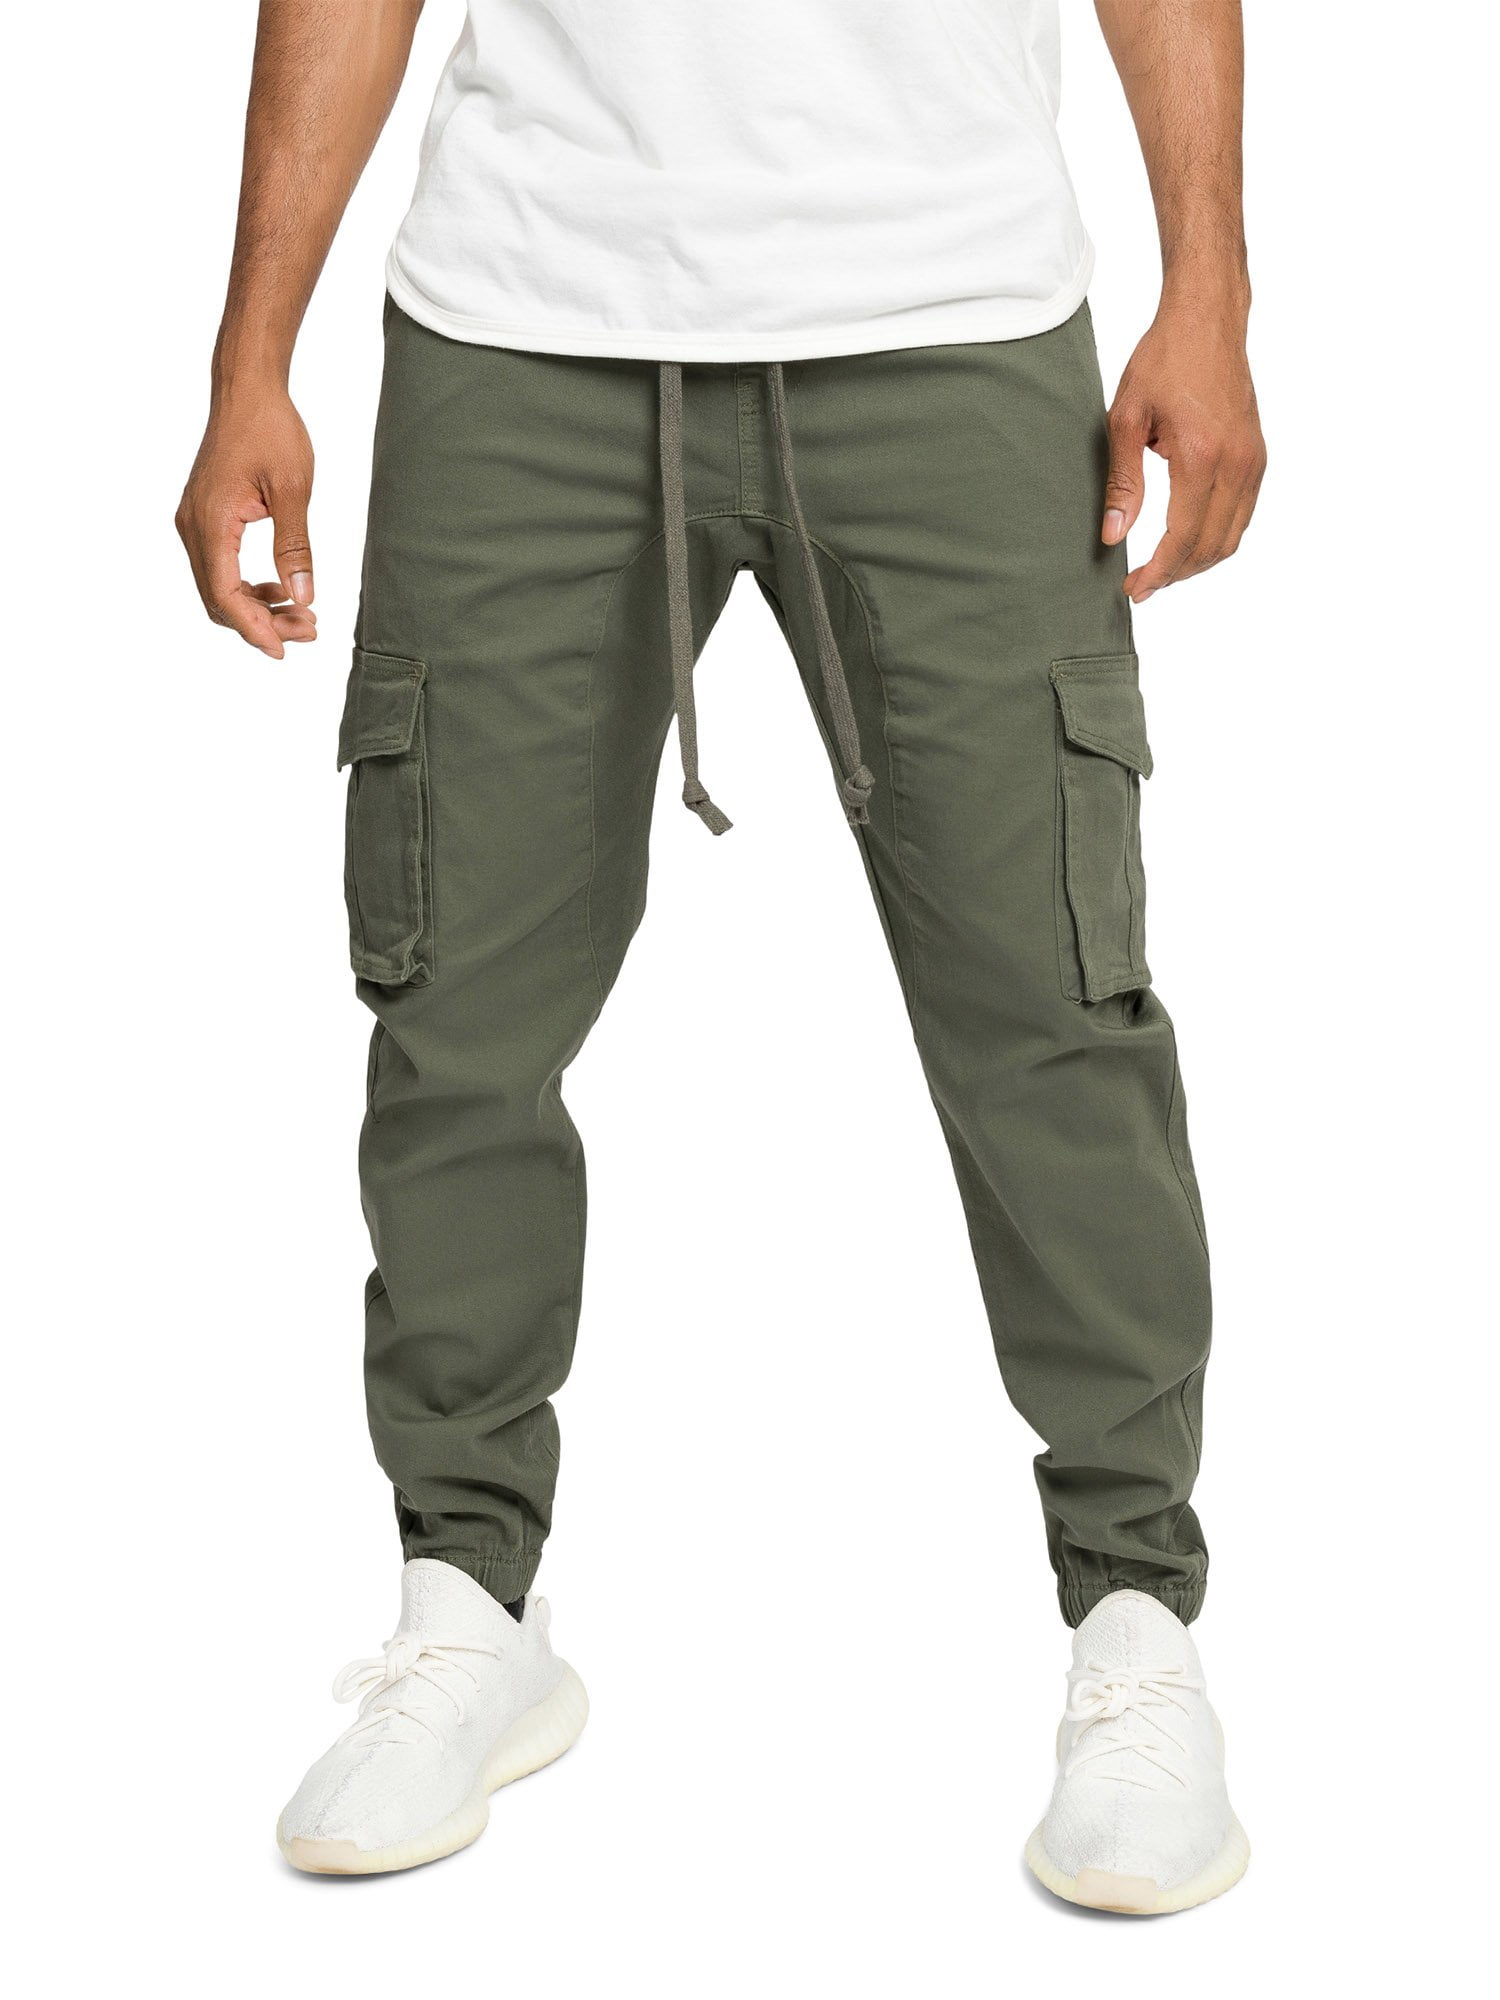 Victorious Men's Jogger Twill Cargo Pants, Up To 5X